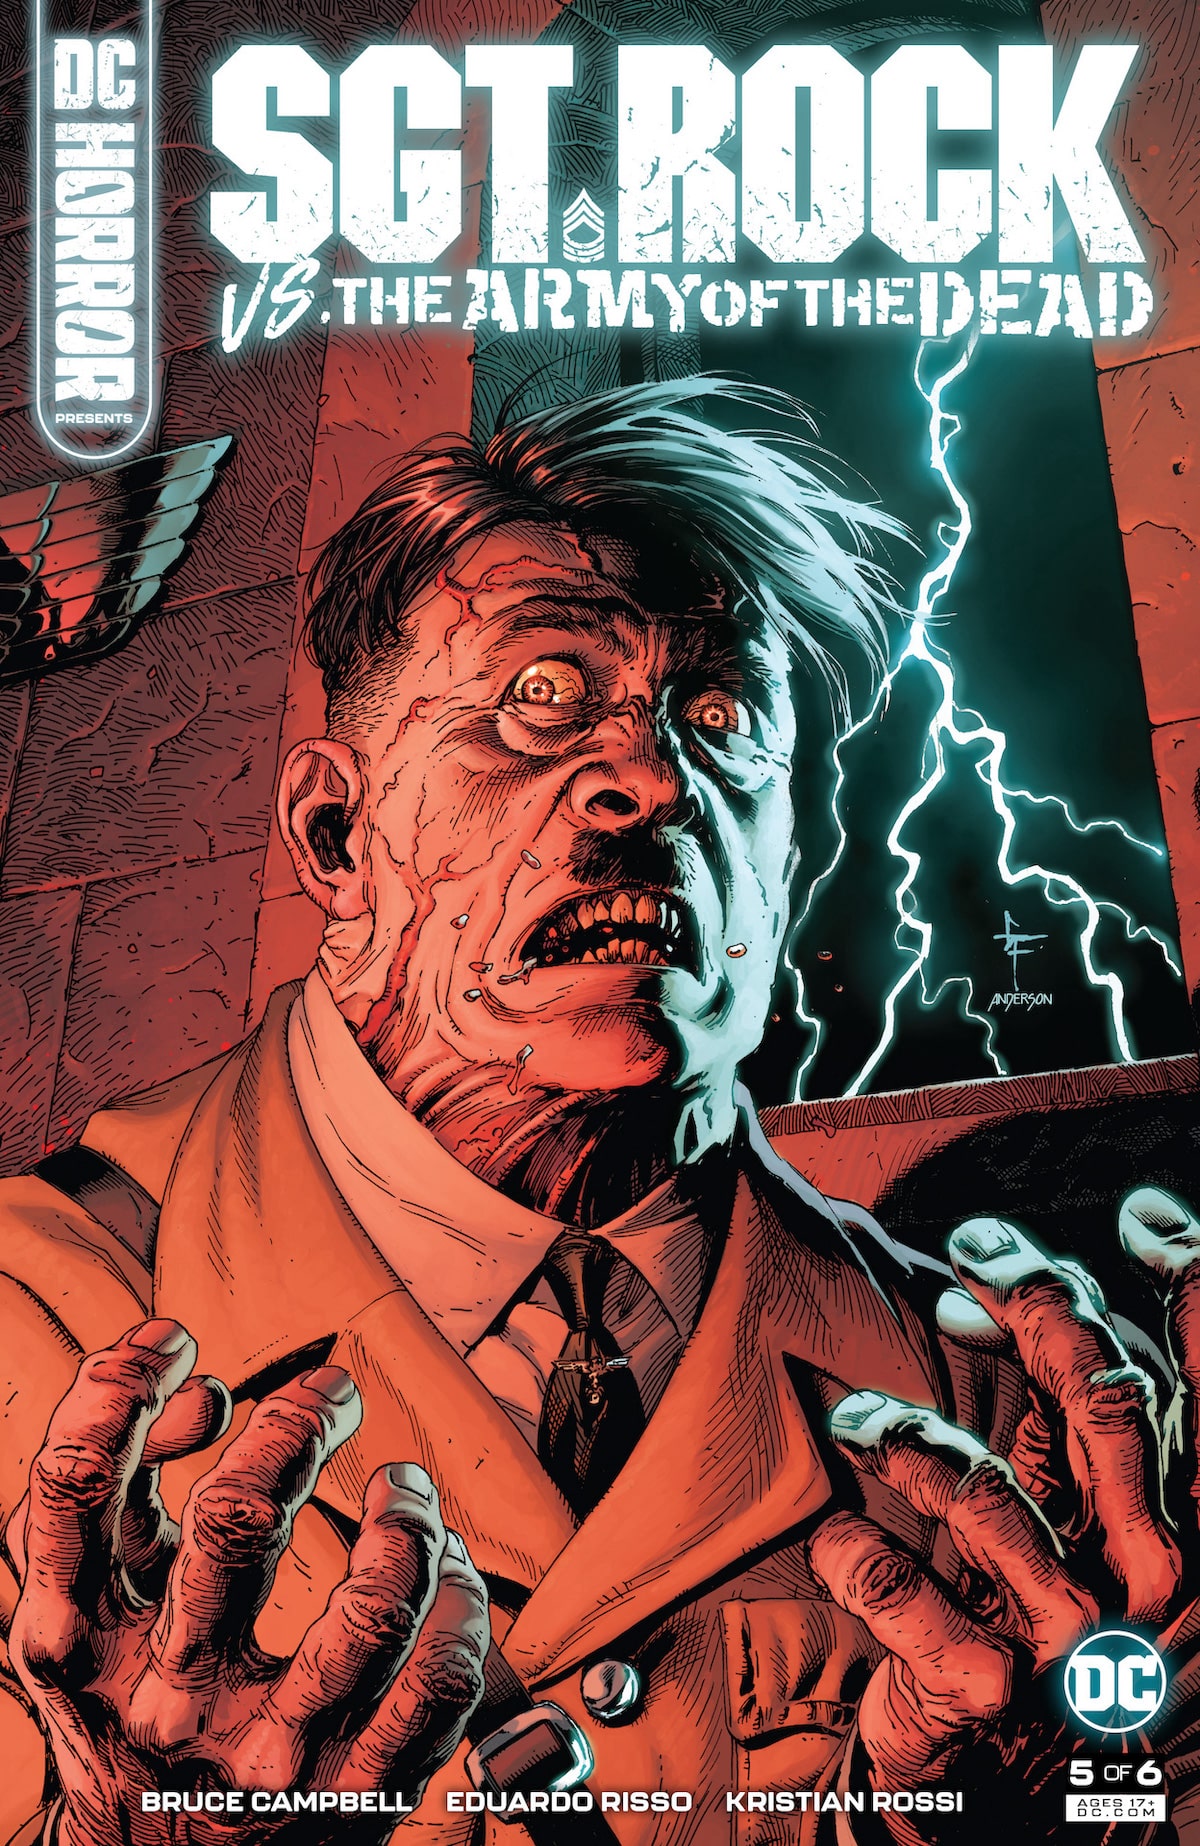 DC Preview: DC Horror Presents: Sgt. Rock vs. The Army of the Dead #5